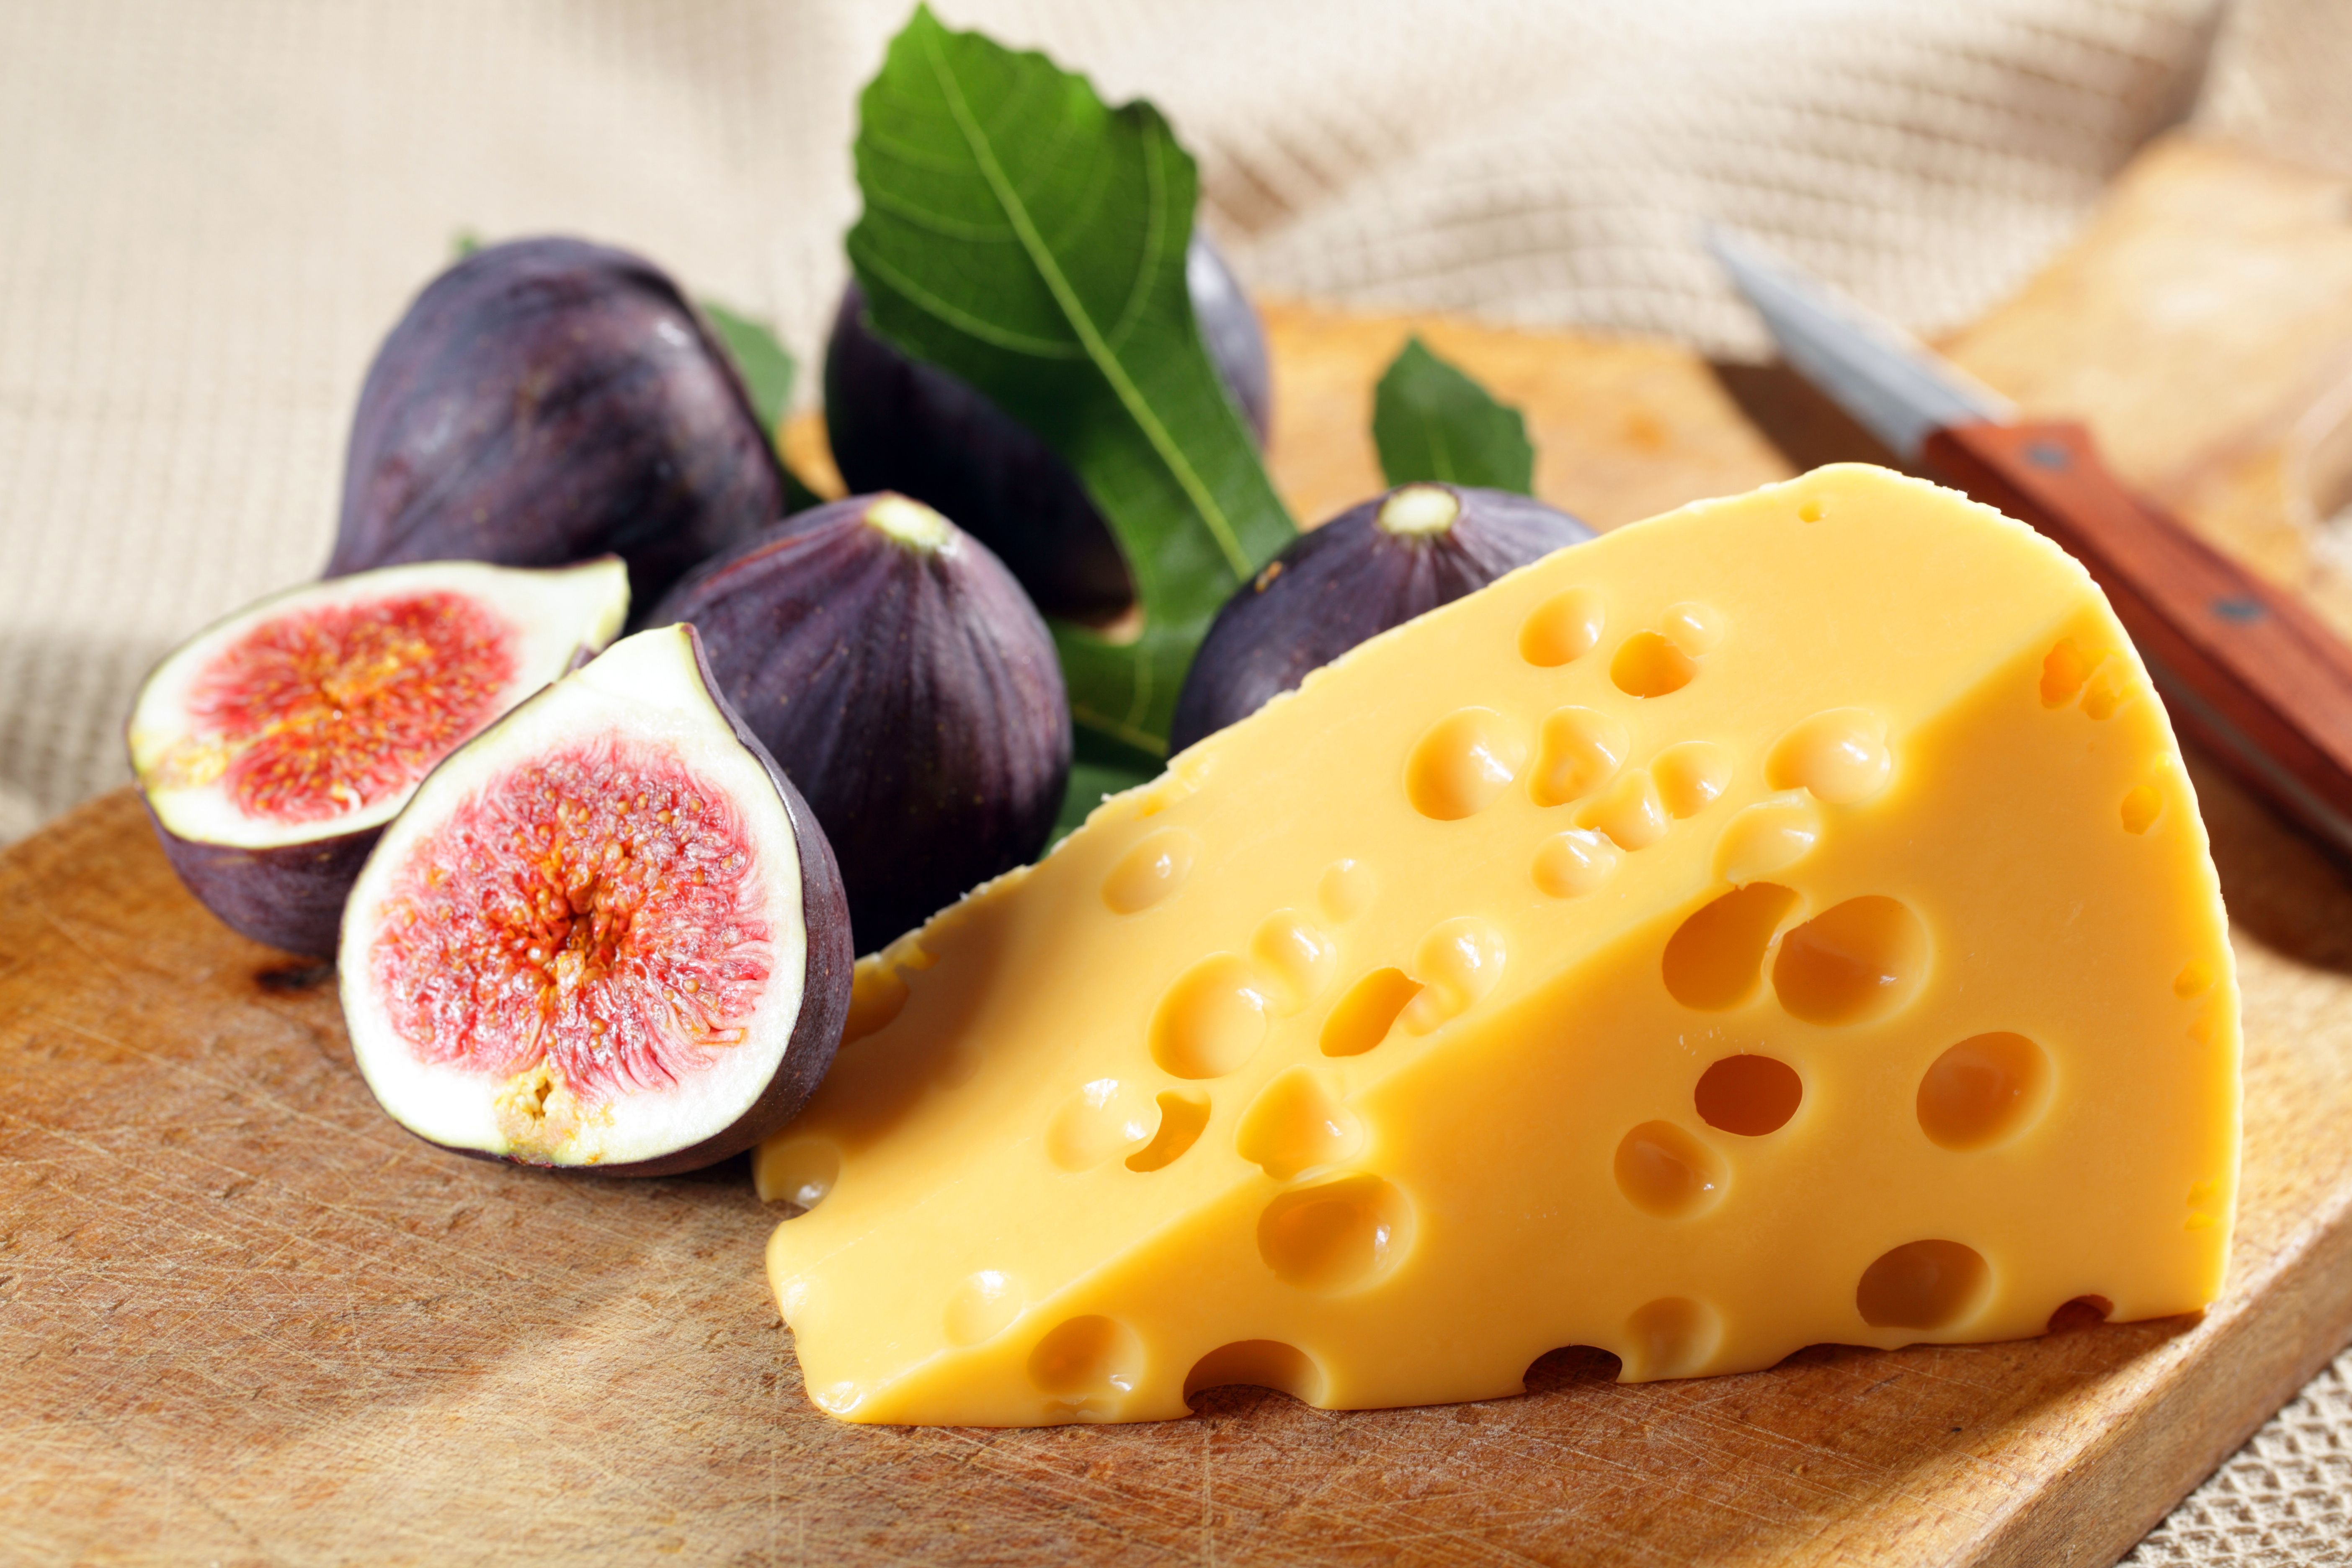 Wallpaper Ficus carica Cheese Food 5616x3744